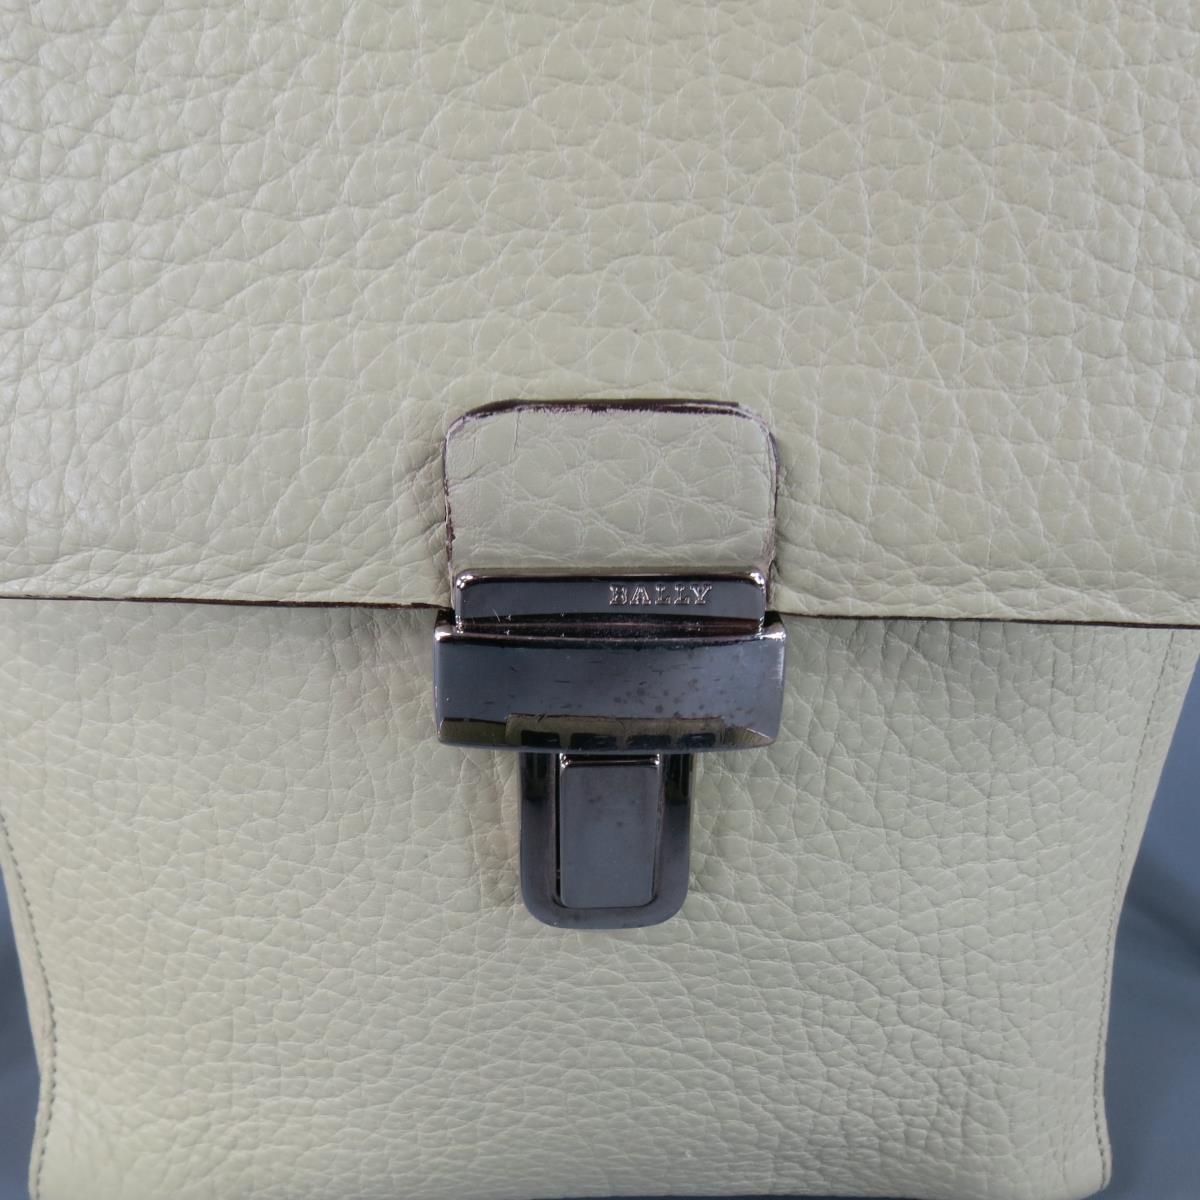 Vintage BALLY bag in a unique mint greenish tone beige textured leather featuring a flap with silver tone buckle, double storage compartments, and shoulder strap with rubber grip panel. In excellent condition with exception of the buckle being